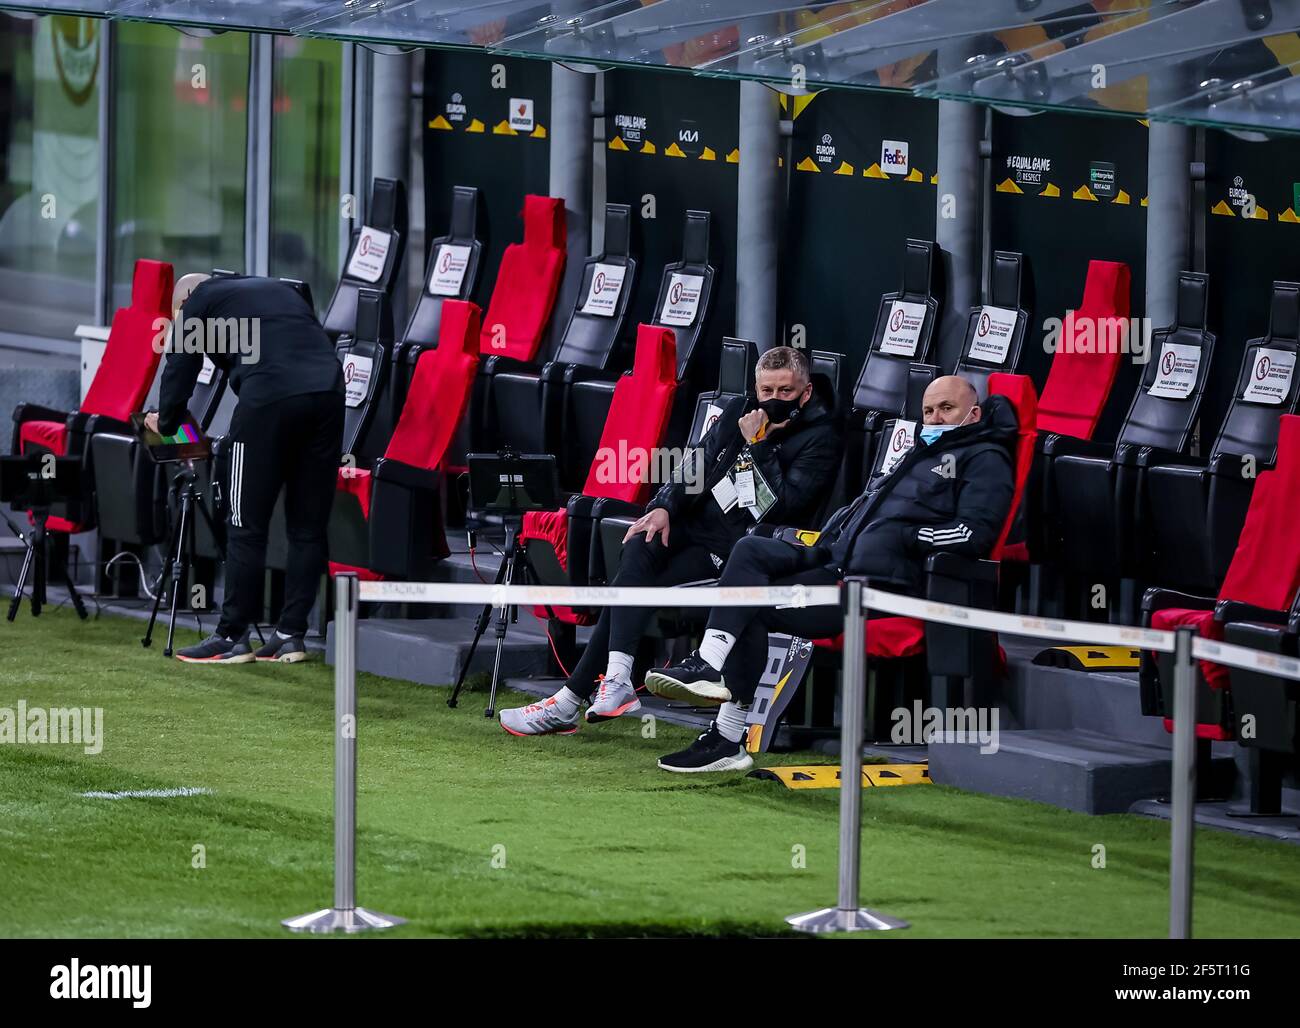 Ole Gunnar Solskjær, Head Coach of Manchester United FC on the bench during  the UEFA Europa League 2020/21 Round of 16 Second Leg football match  between AC Milan and Manchester United FC